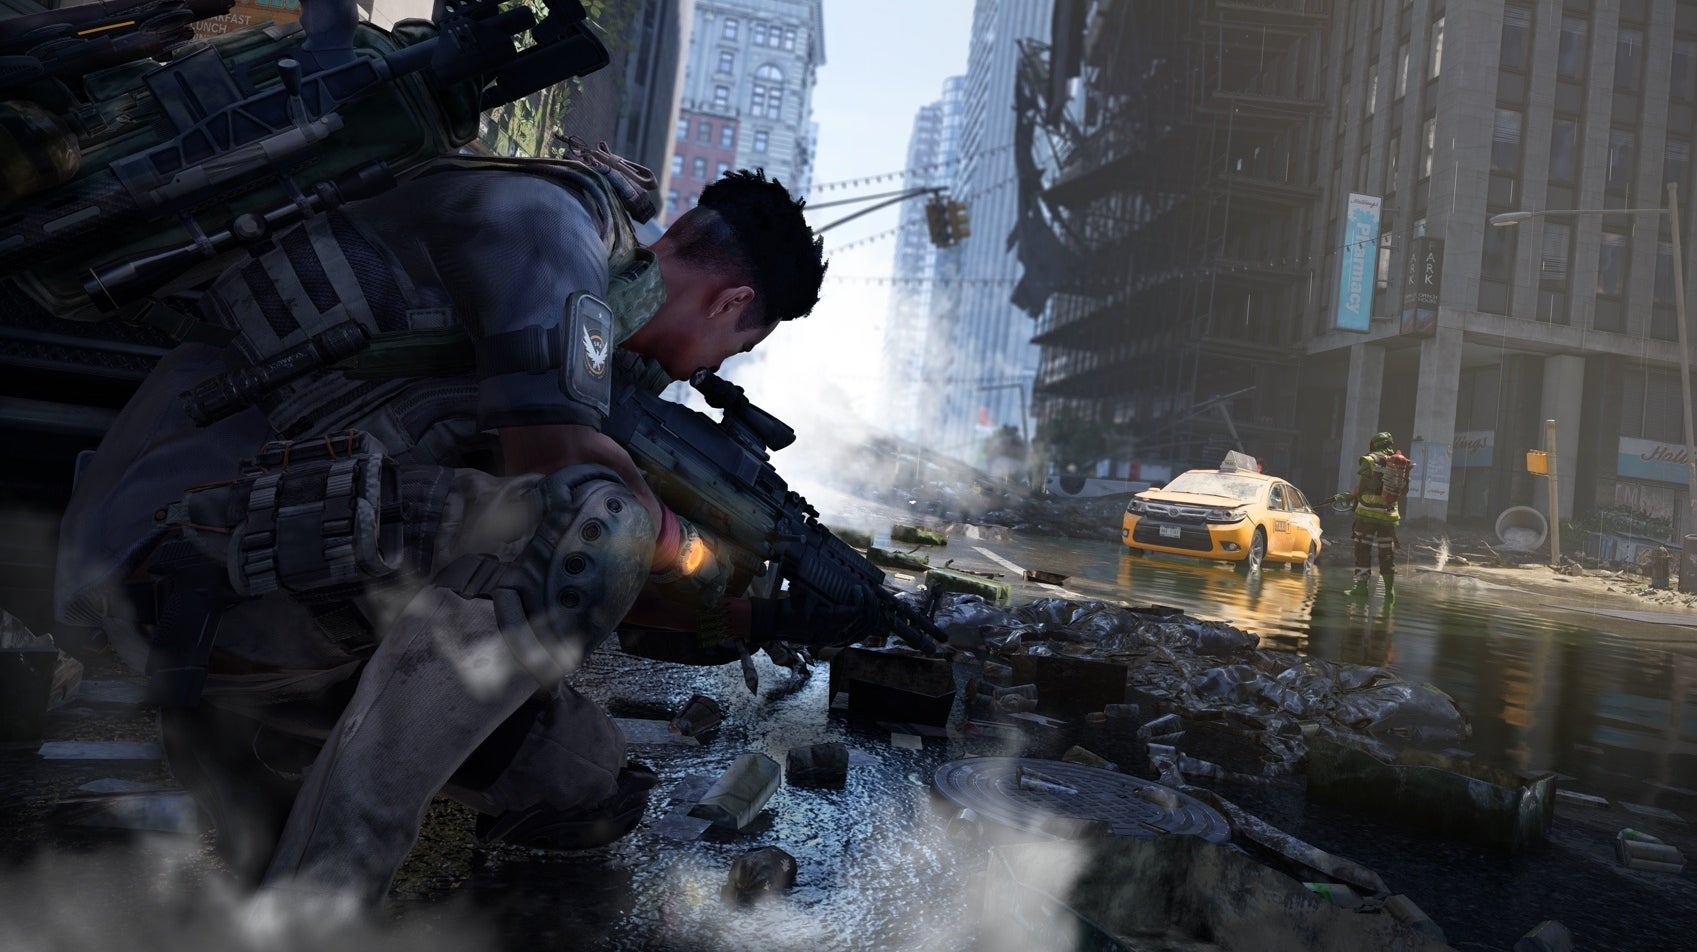 Image for The Division 2's Warlords of New York paid expansion liberating Manhattan in March